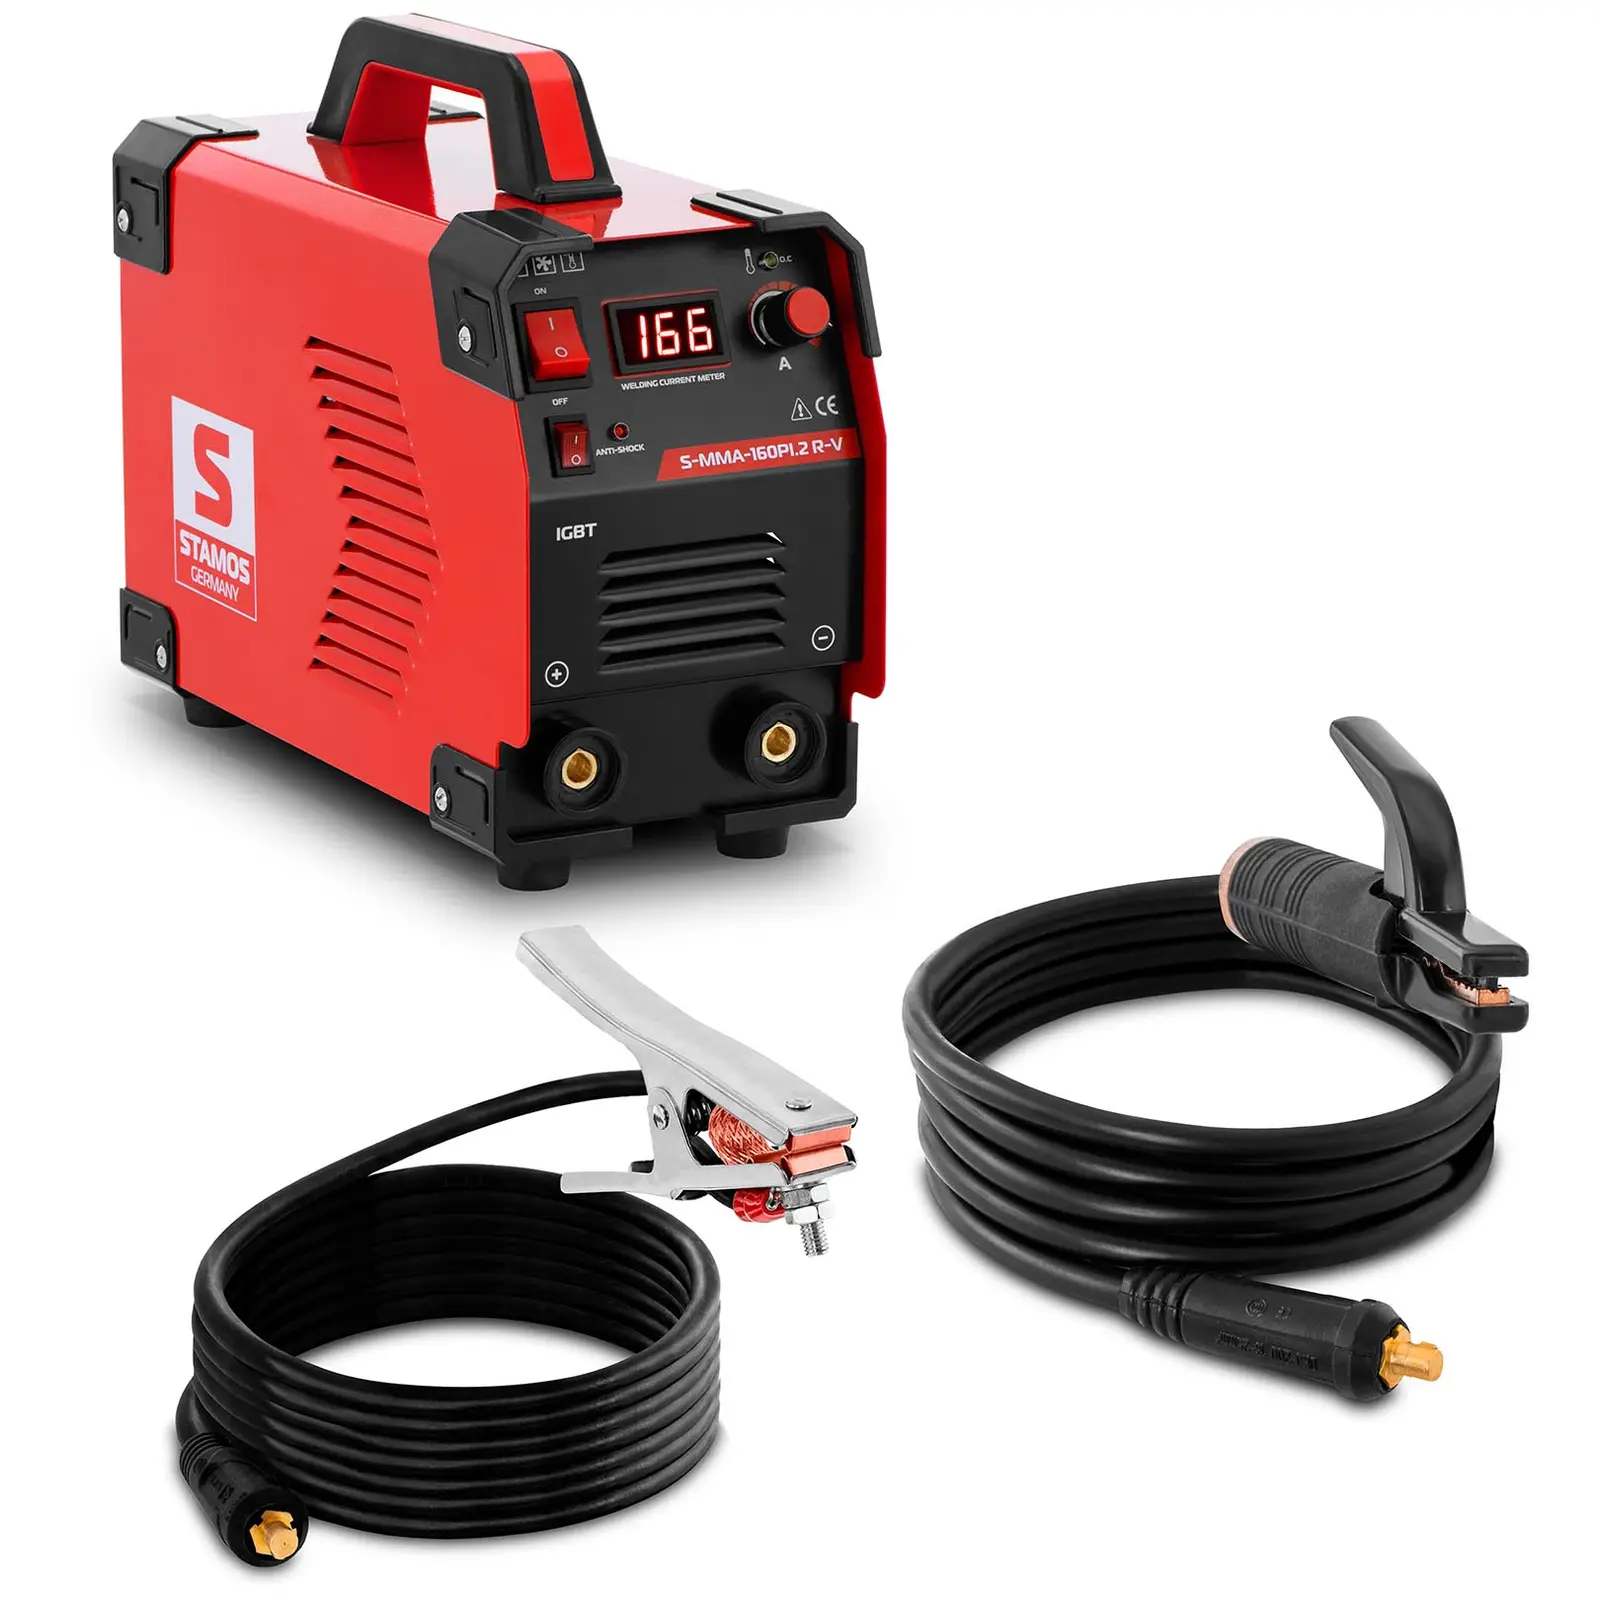 Electrode welder - 8 m cable - 160 A -  duty cycle 60% - IGBT - VRD